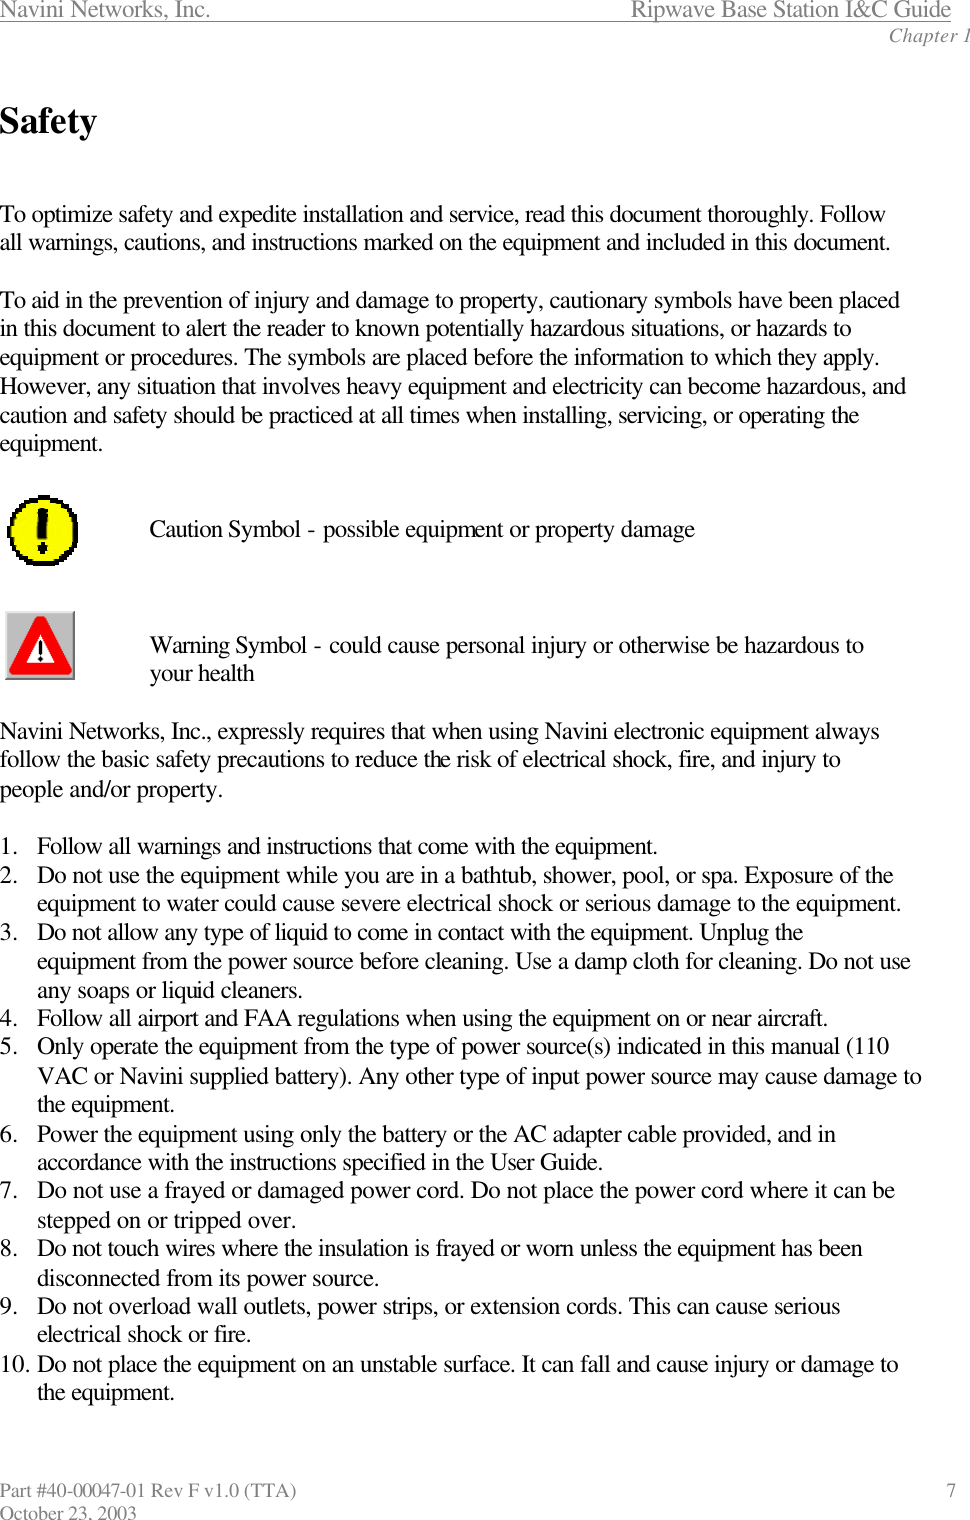 Navini Networks, Inc.                      Ripwave Base Station I&amp;C Guide Chapter 1 Part #40-00047-01 Rev F v1.0 (TTA)                               7 October 23, 2003  Safety   To optimize safety and expedite installation and service, read this document thoroughly. Follow all warnings, cautions, and instructions marked on the equipment and included in this document.  To aid in the prevention of injury and damage to property, cautionary symbols have been placed in this document to alert the reader to known potentially hazardous situations, or hazards to equipment or procedures. The symbols are placed before the information to which they apply. However, any situation that involves heavy equipment and electricity can become hazardous, and caution and safety should be practiced at all times when installing, servicing, or operating the equipment.     Caution Symbol - possible equipment or property damage    Warning Symbol - could cause personal injury or otherwise be hazardous to  your health  Navini Networks, Inc., expressly requires that when using Navini electronic equipment always follow the basic safety precautions to reduce the risk of electrical shock, fire, and injury to people and/or property.  1.  Follow all warnings and instructions that come with the equipment. 2.  Do not use the equipment while you are in a bathtub, shower, pool, or spa. Exposure of the equipment to water could cause severe electrical shock or serious damage to the equipment. 3.  Do not allow any type of liquid to come in contact with the equipment. Unplug the equipment from the power source before cleaning. Use a damp cloth for cleaning. Do not use any soaps or liquid cleaners. 4.  Follow all airport and FAA regulations when using the equipment on or near aircraft. 5.  Only operate the equipment from the type of power source(s) indicated in this manual (110 VAC or Navini supplied battery). Any other type of input power source may cause damage to the equipment. 6.  Power the equipment using only the battery or the AC adapter cable provided, and in accordance with the instructions specified in the User Guide. 7.  Do not use a frayed or damaged power cord. Do not place the power cord where it can be stepped on or tripped over. 8.  Do not touch wires where the insulation is frayed or worn unless the equipment has been disconnected from its power source. 9.  Do not overload wall outlets, power strips, or extension cords. This can cause serious electrical shock or fire.  10. Do not place the equipment on an unstable surface. It can fall and cause injury or damage to the equipment. 